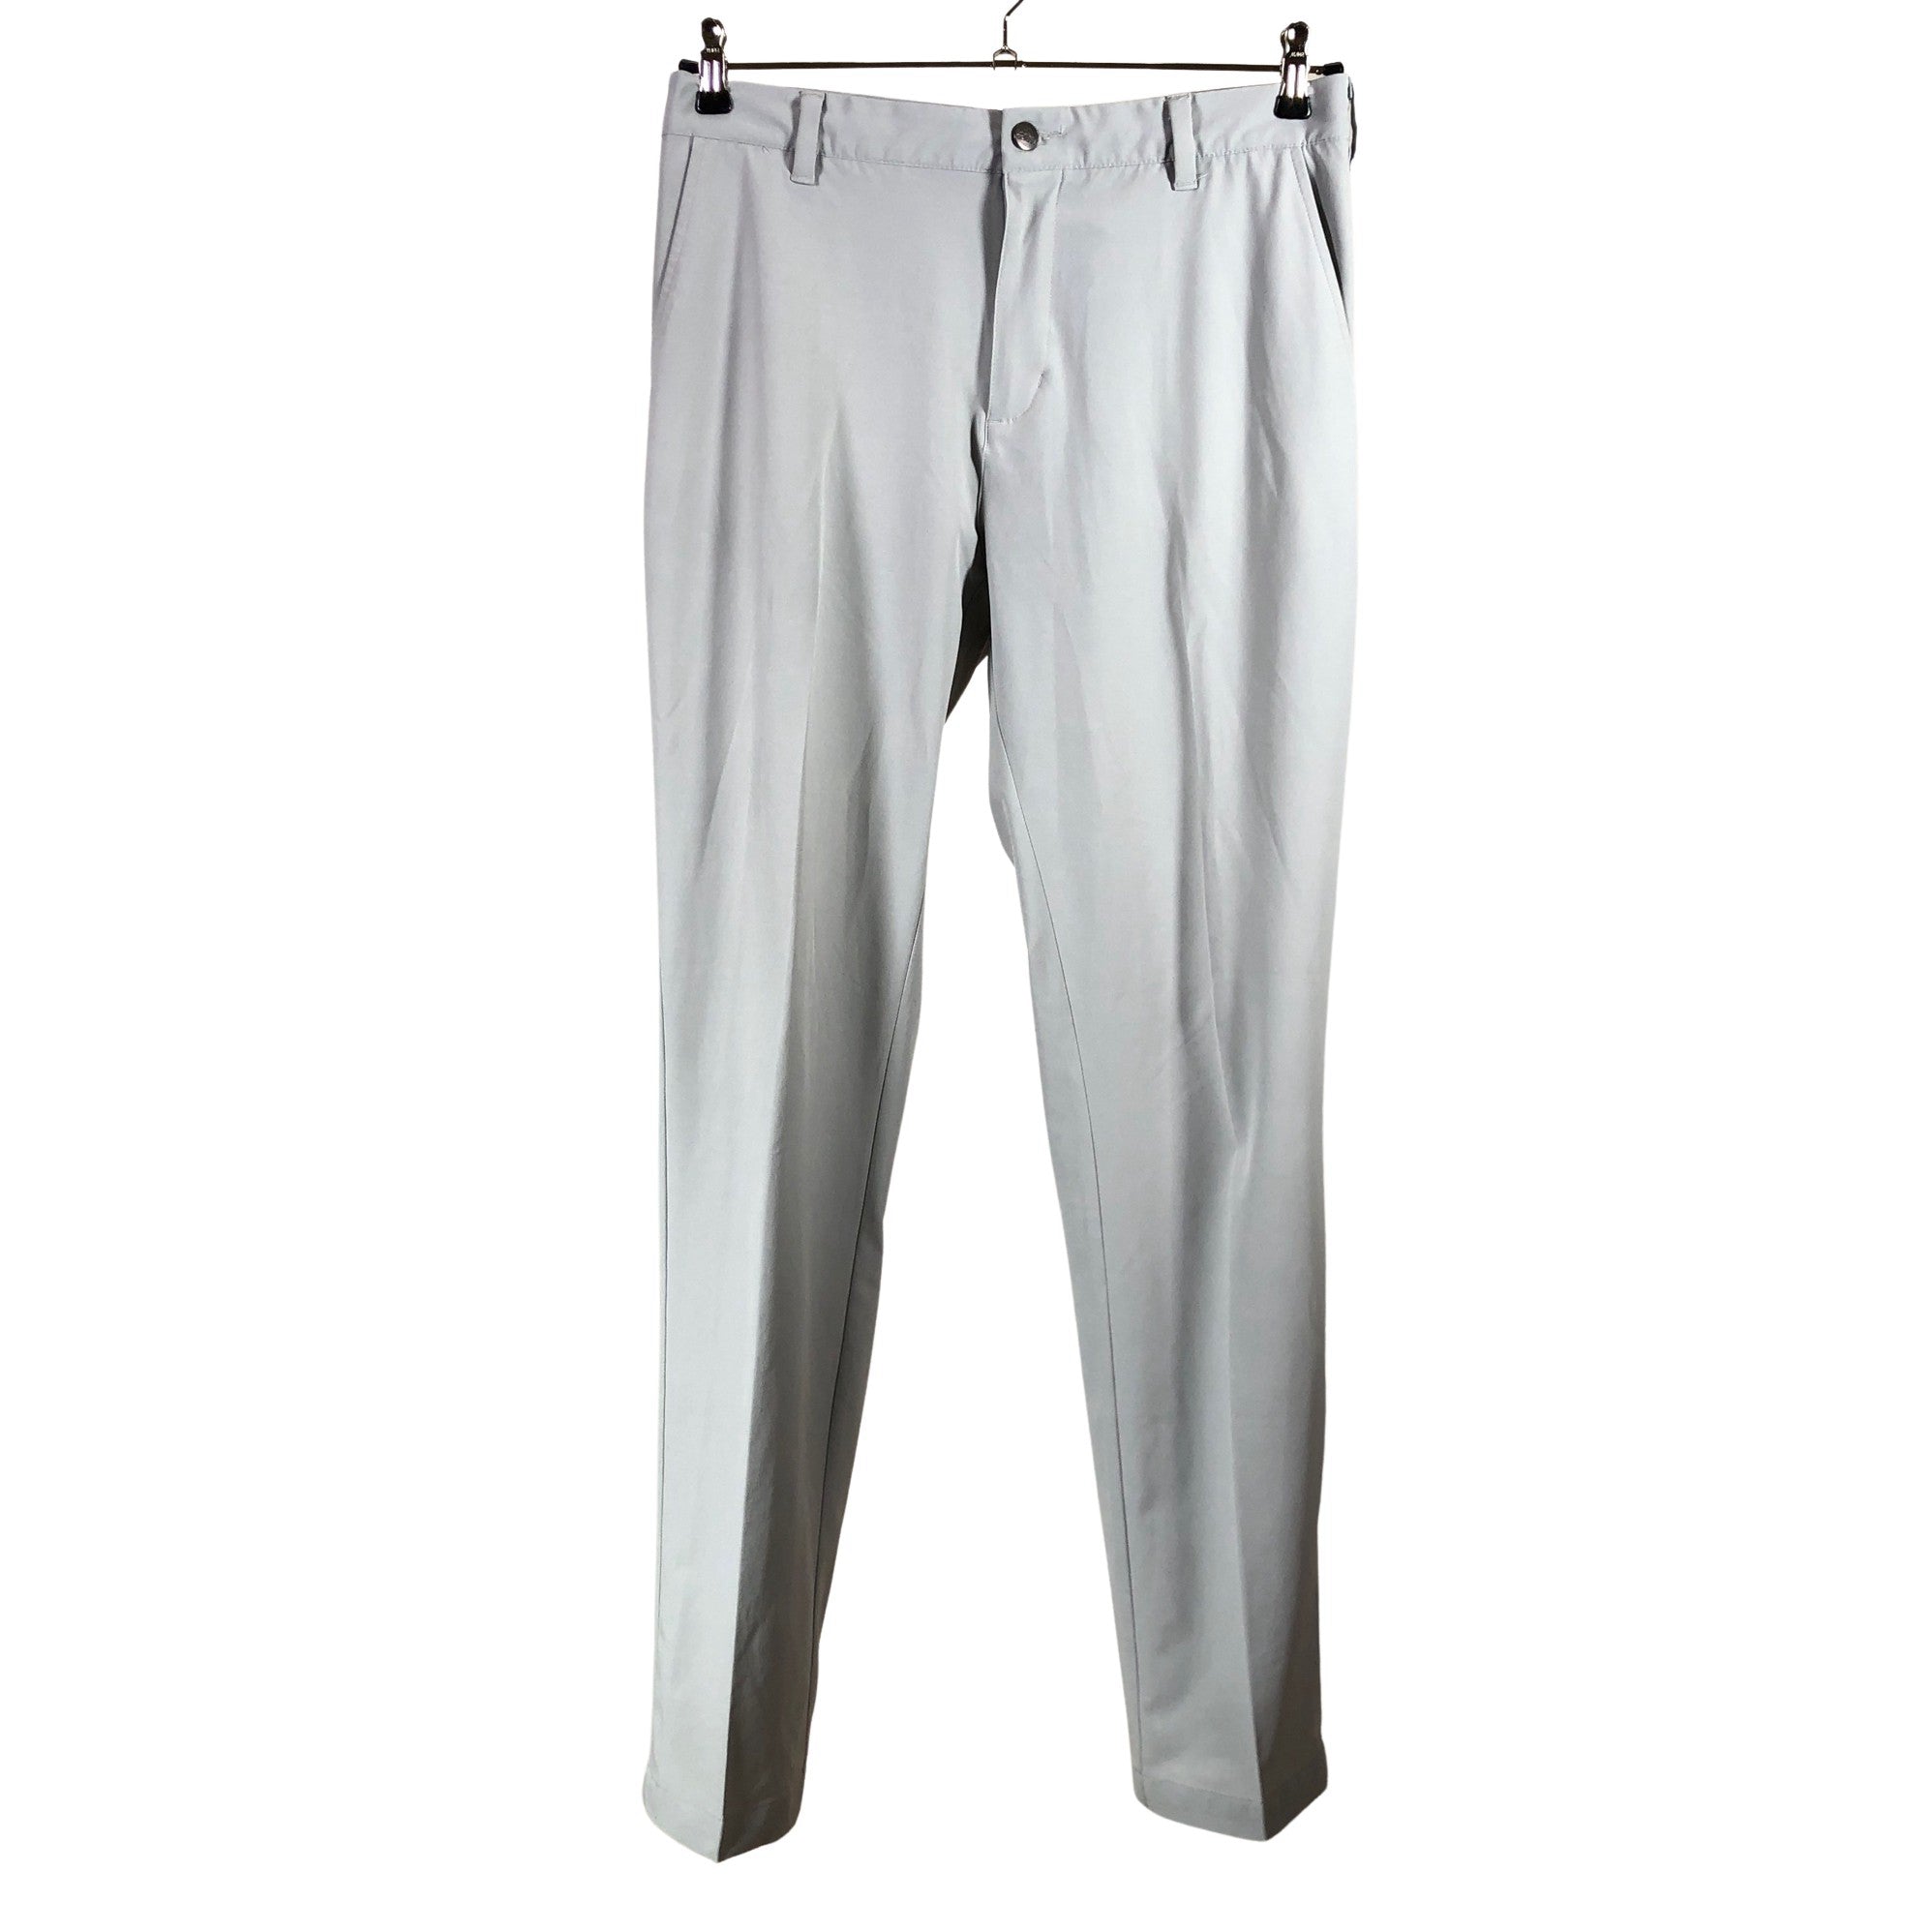 adidas E Track Pant Grey Training Track Pant Buy adidas E Track Pant Grey  Training Track Pant Online at Best Price in India  Nykaa